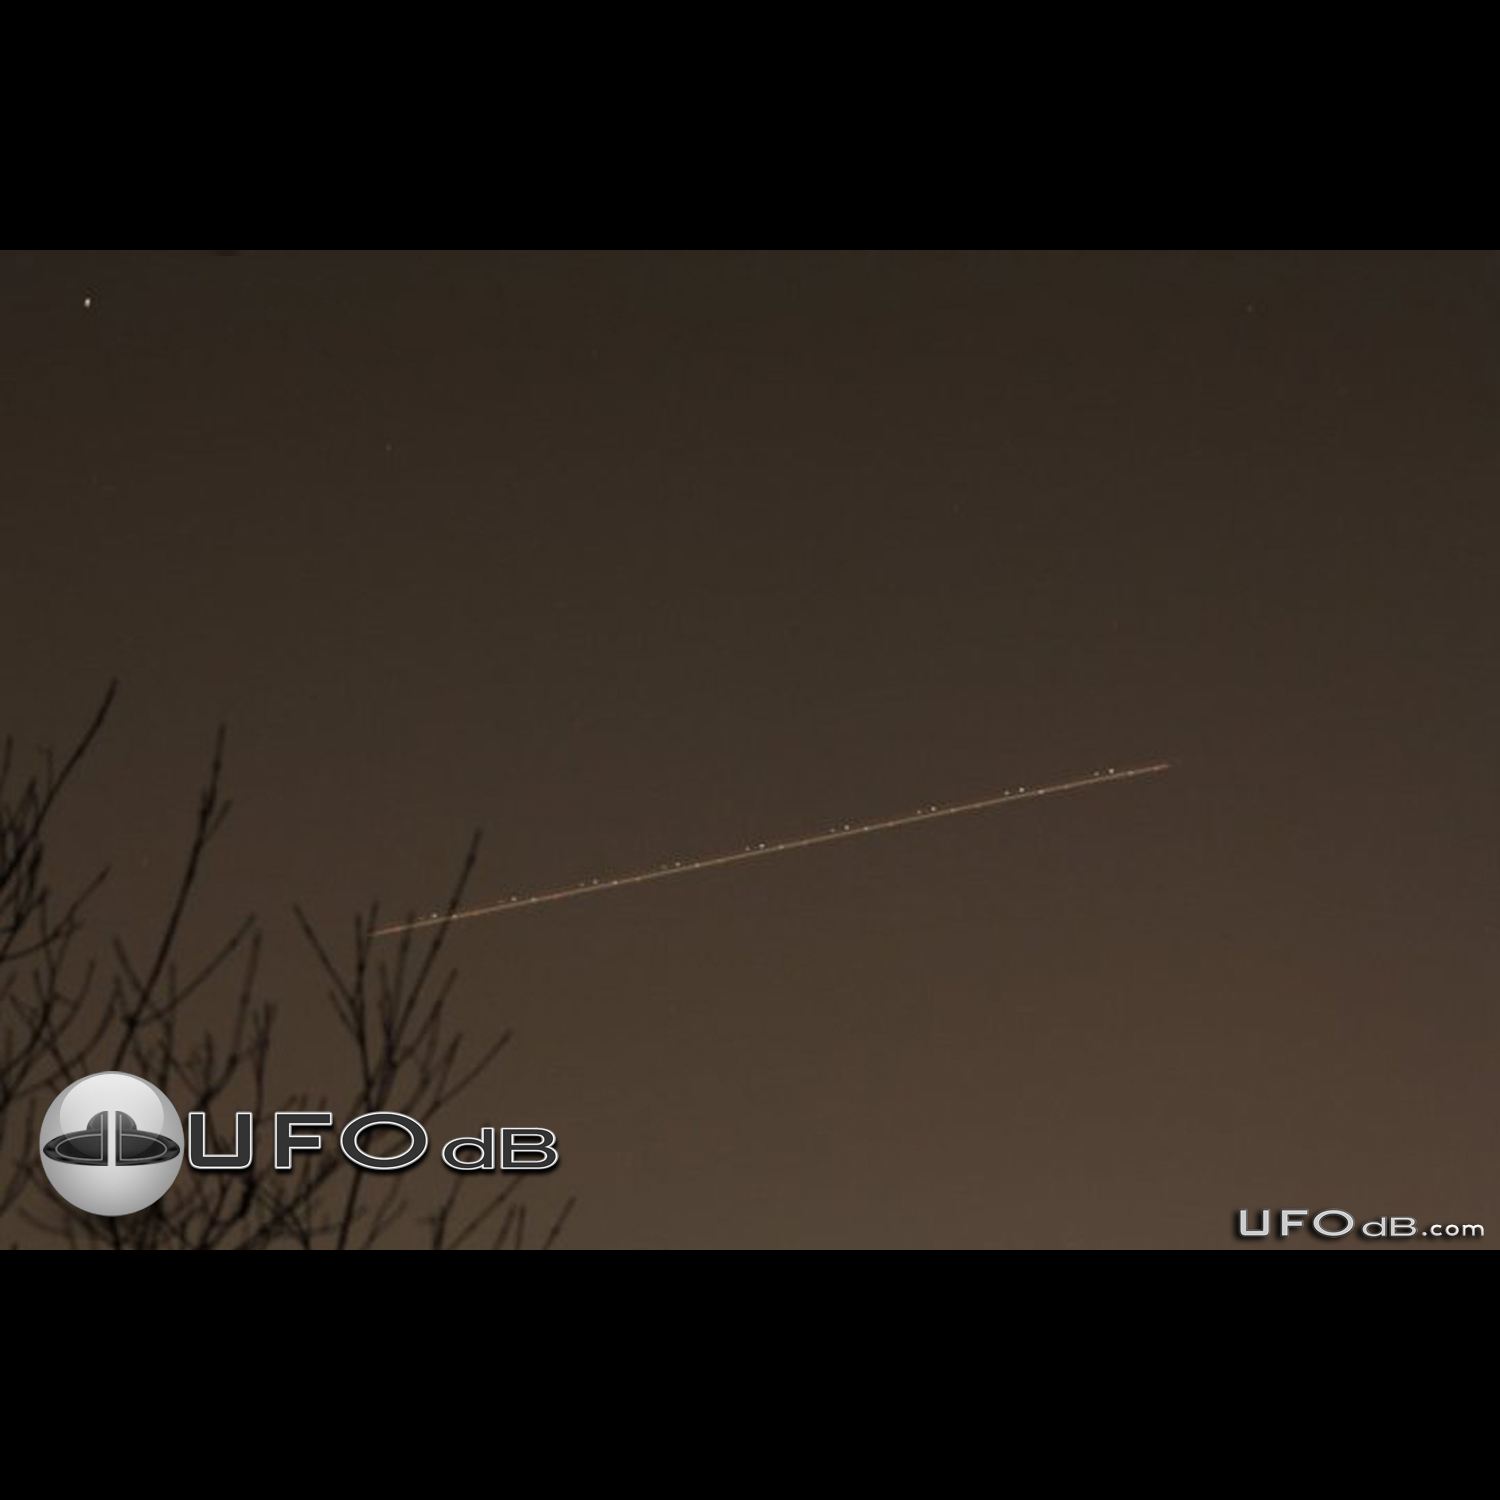 Huge UFO Spaceship with glowing lights seen in Germany | February 2011 UFO Picture #254-1